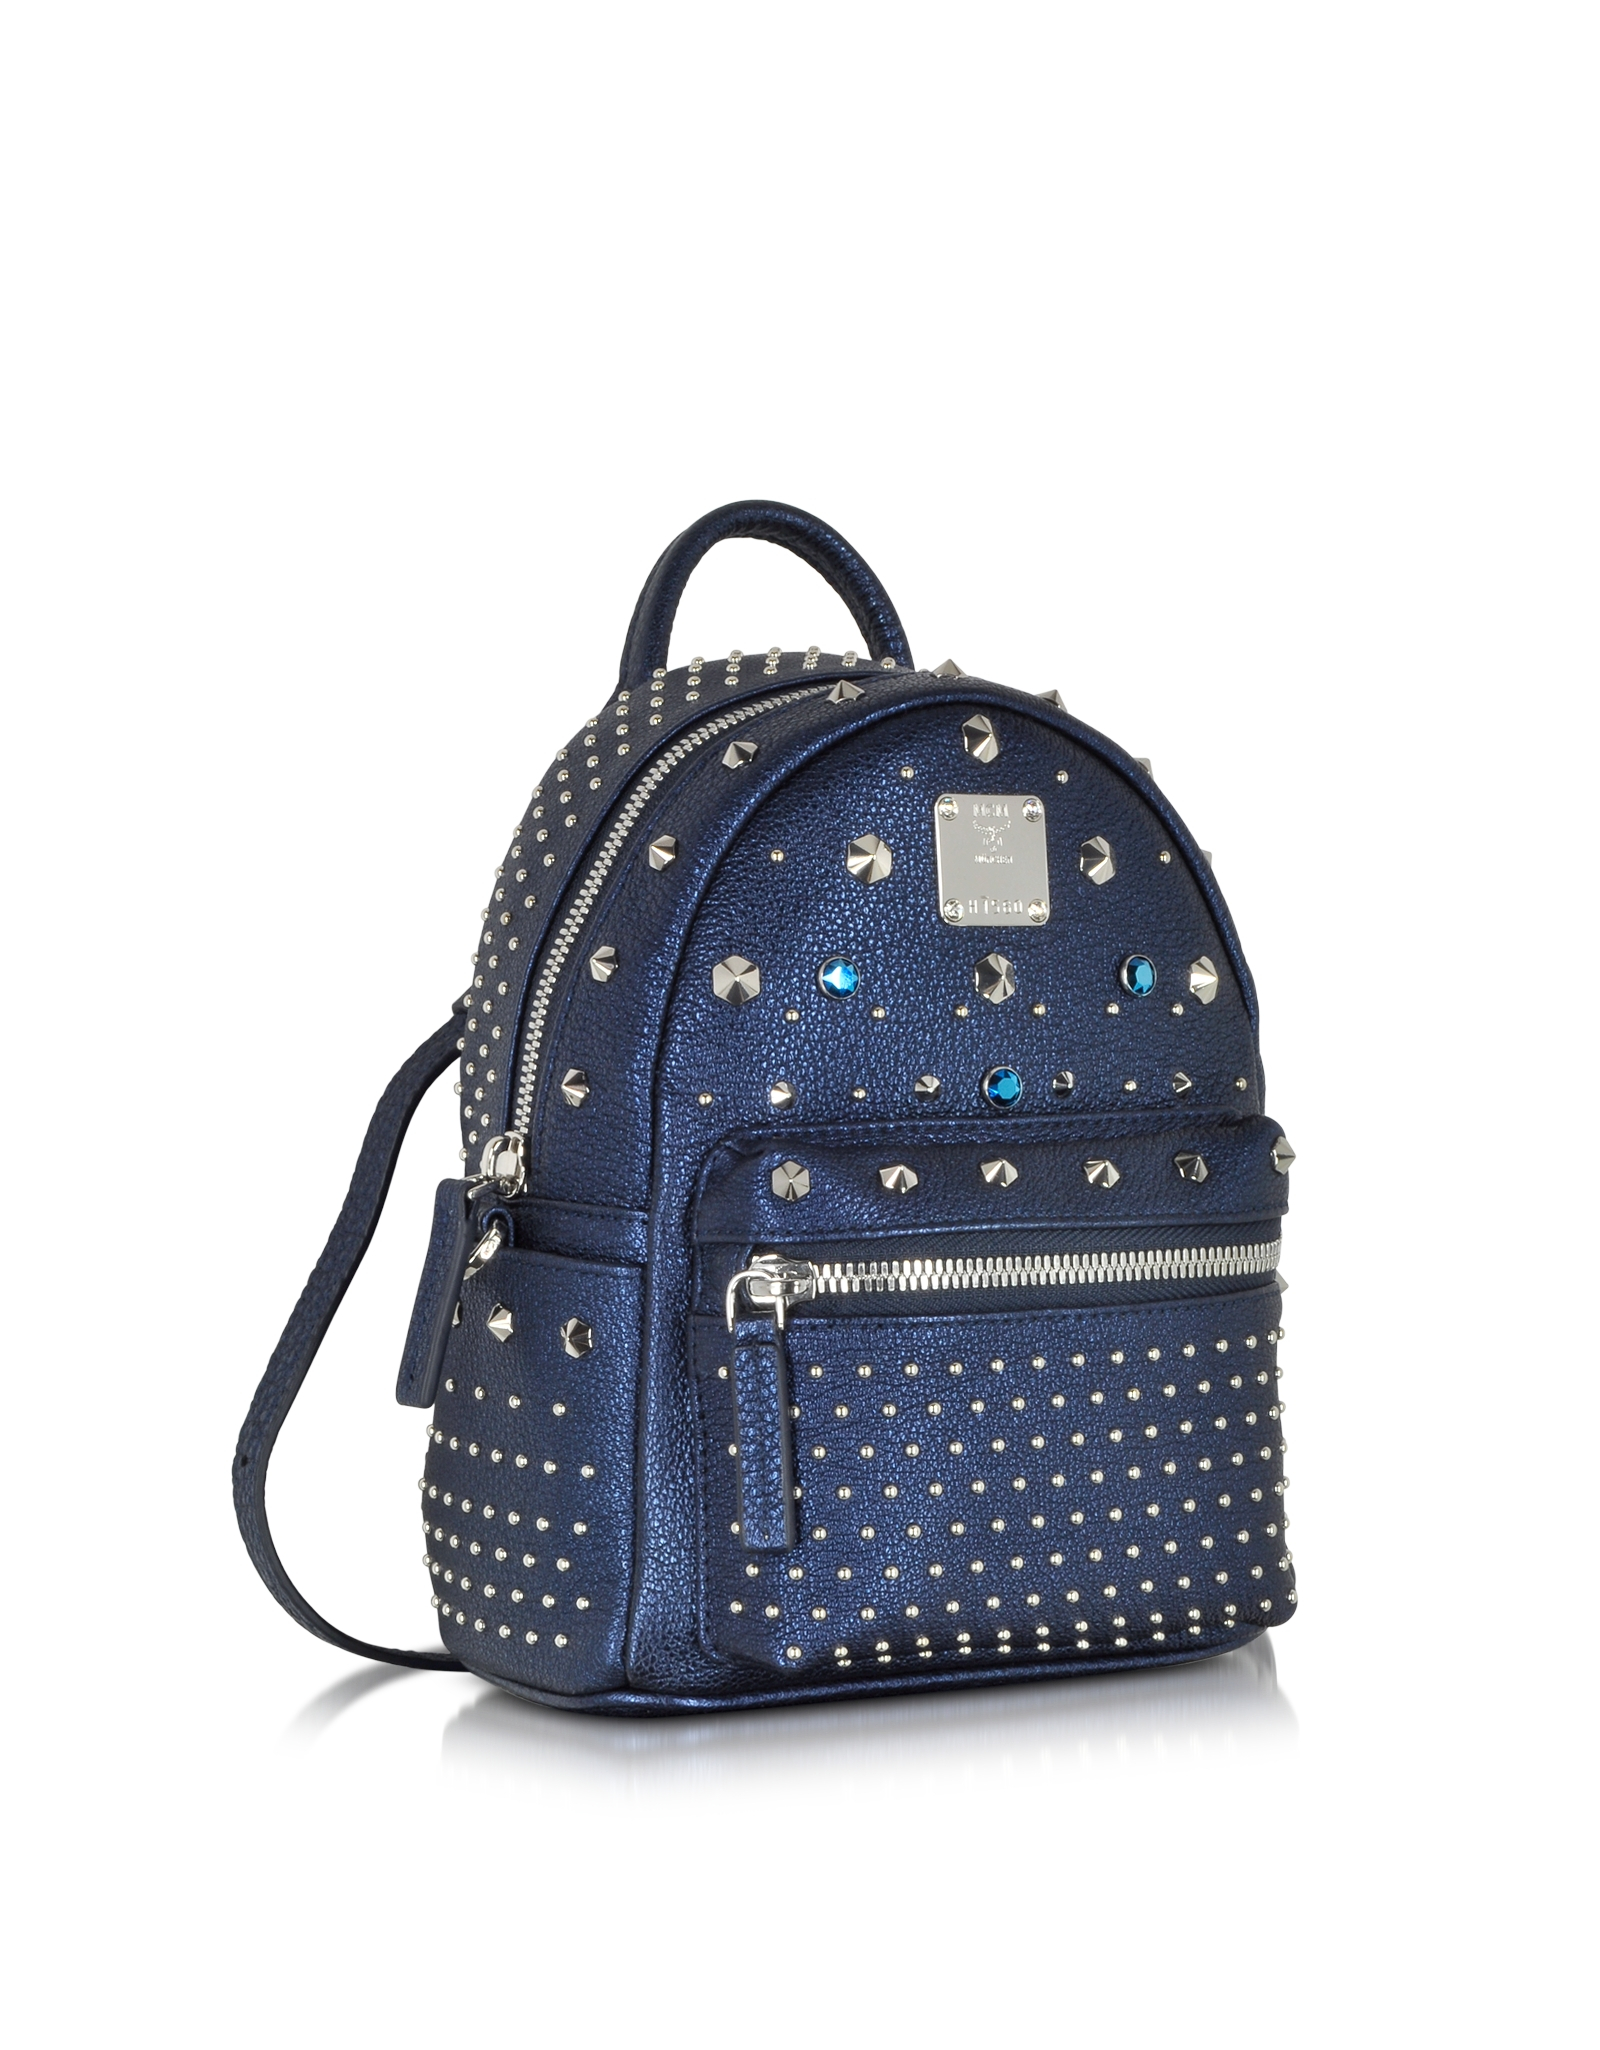 Lyst - Mcm Stark Special Metallic Navy Leather X-Mini Backpack in Blue